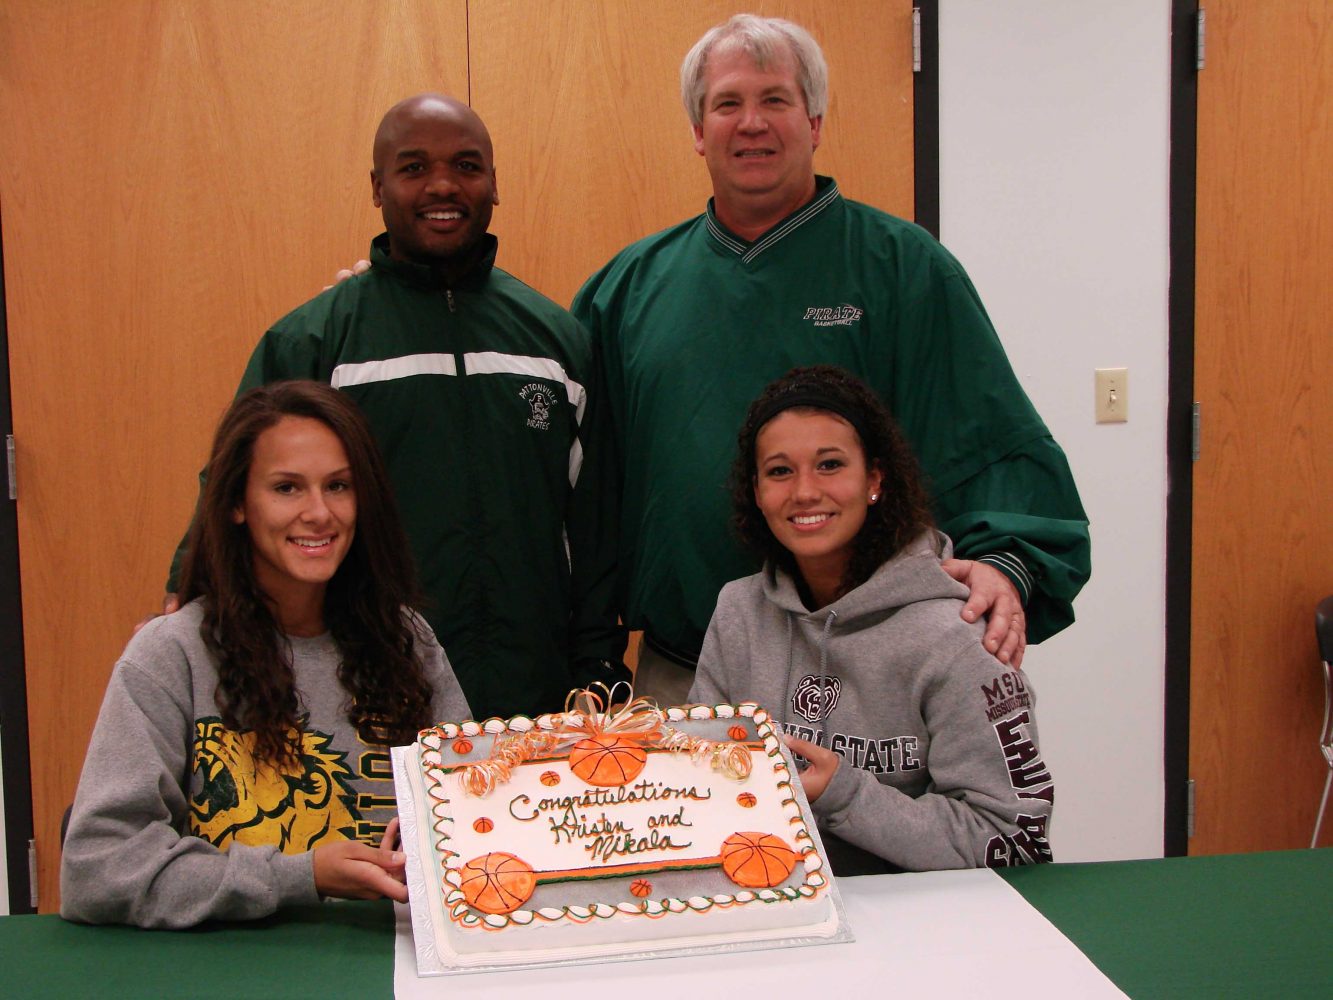 Kristen Hanna and Mikala McGhee with their coaches after signing